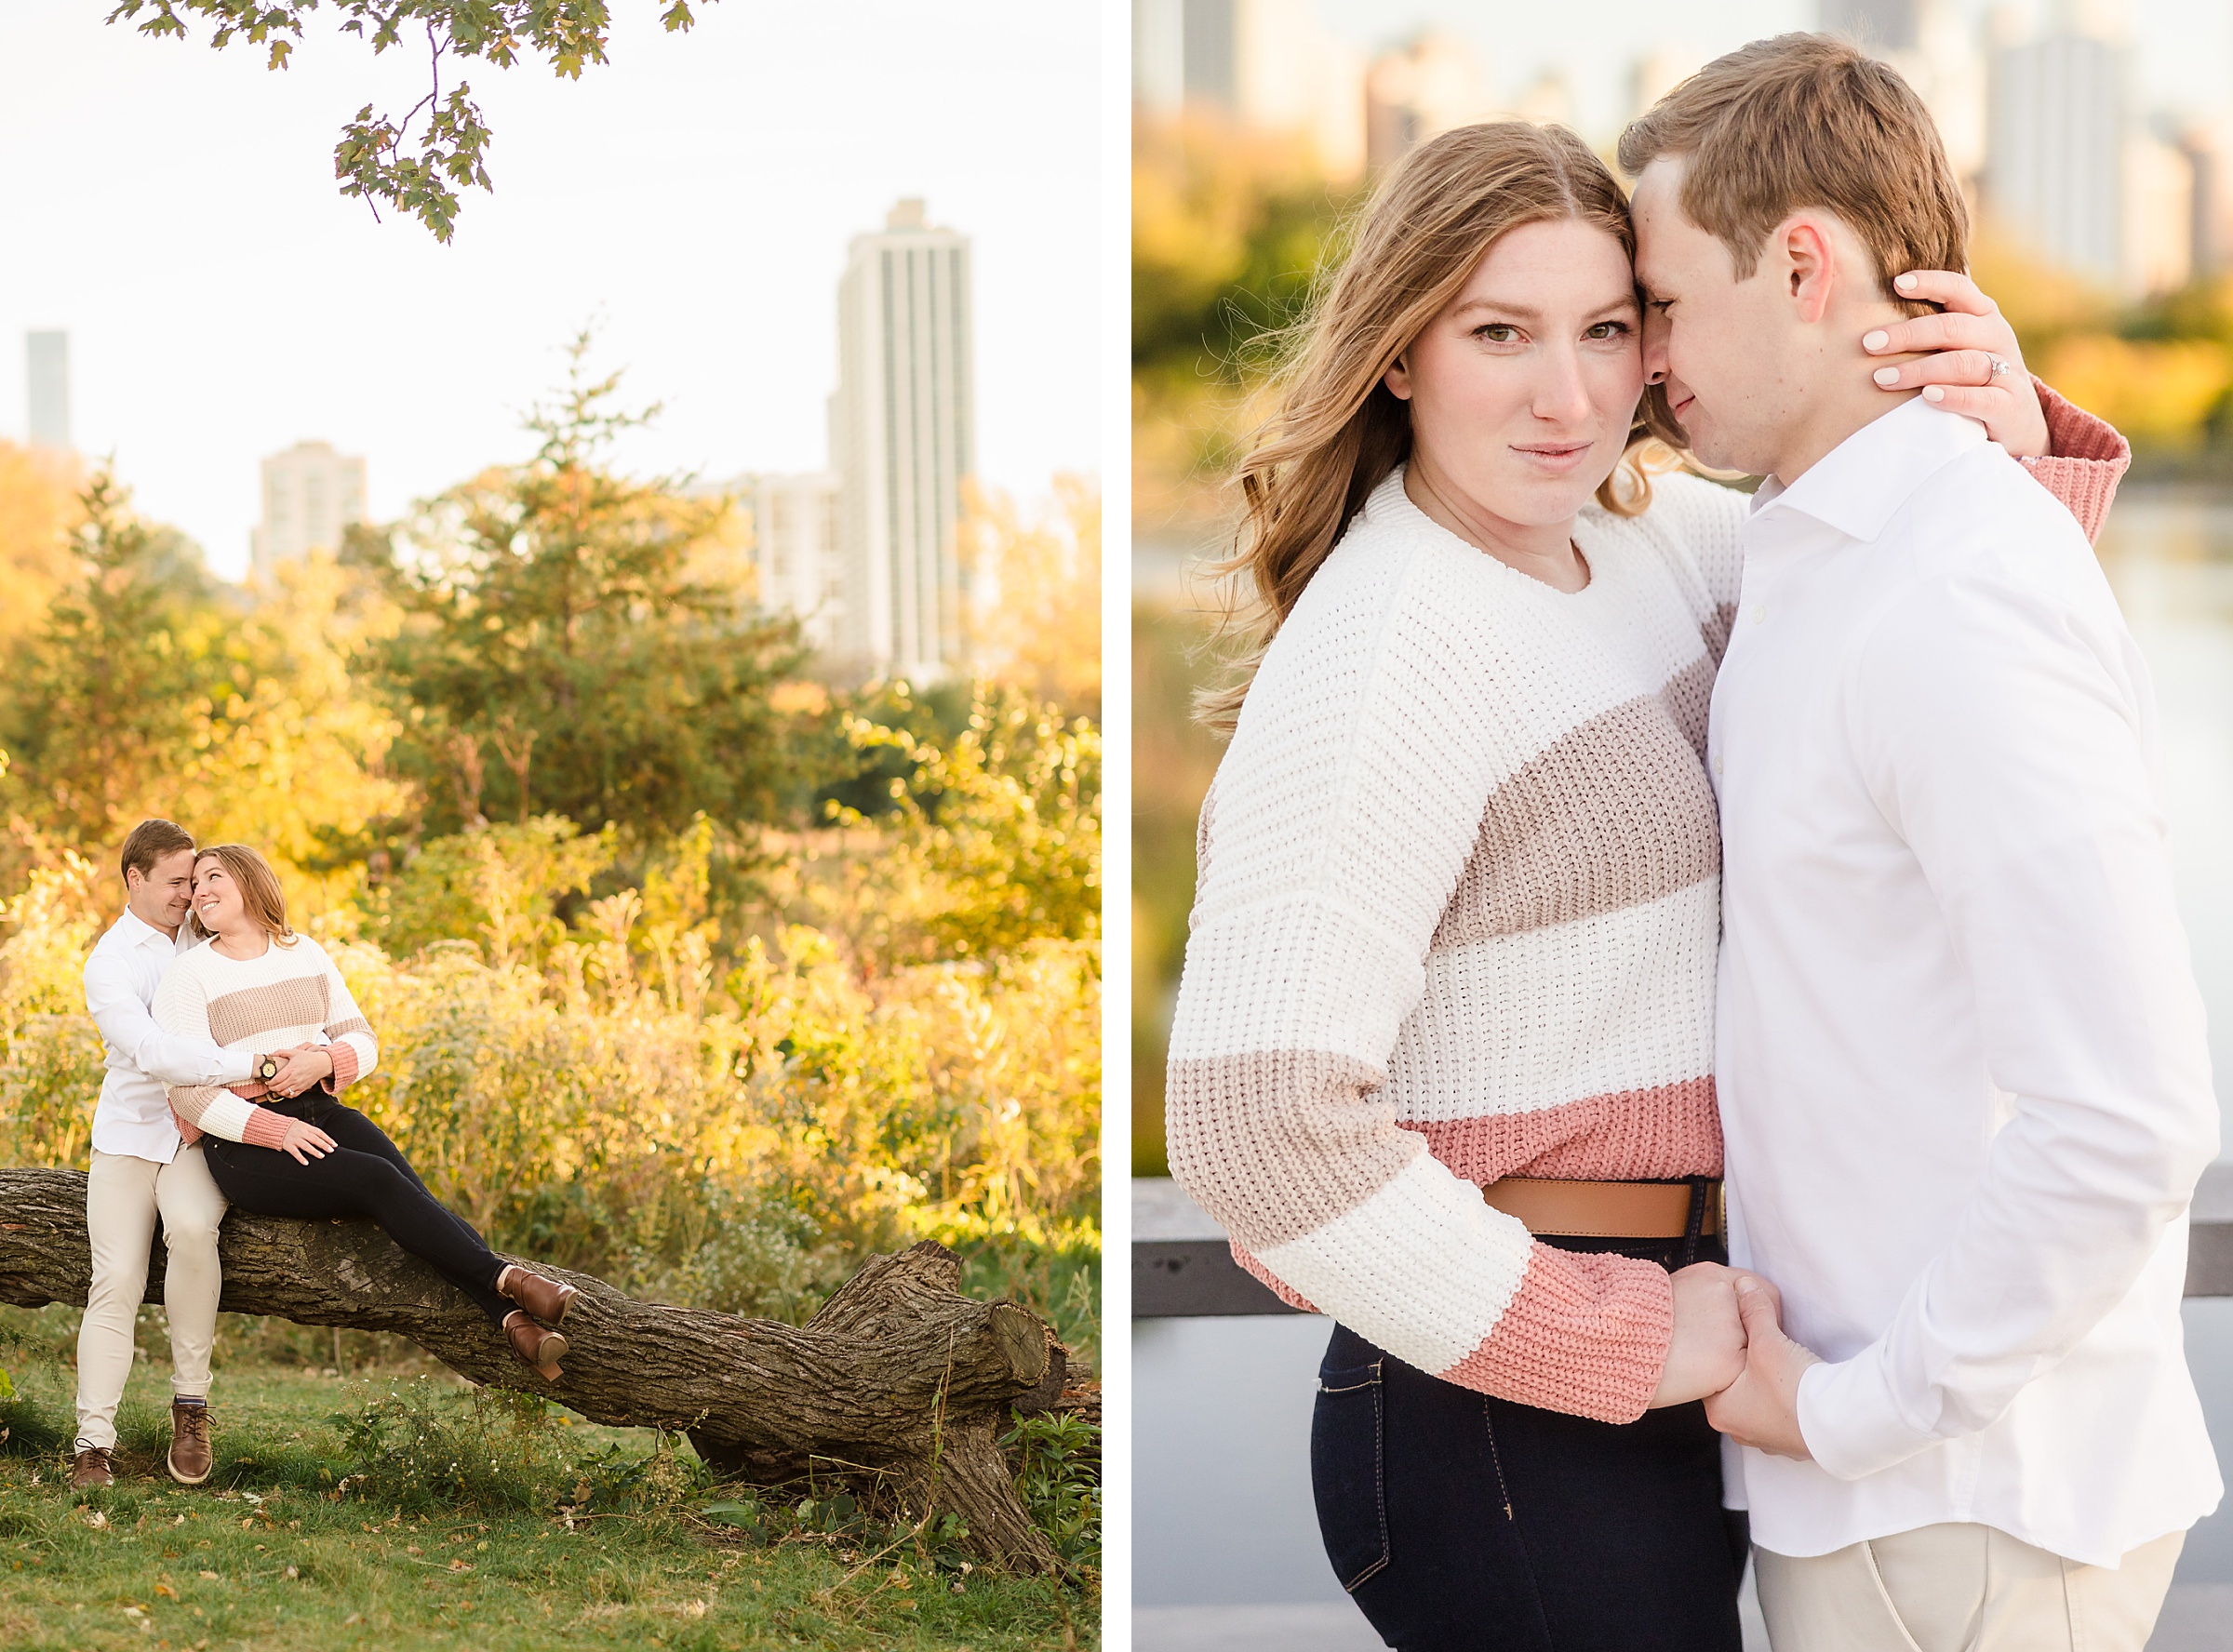 Couple embrace during their engagement sessionat Lincoln Park in Chicago, Illinois.